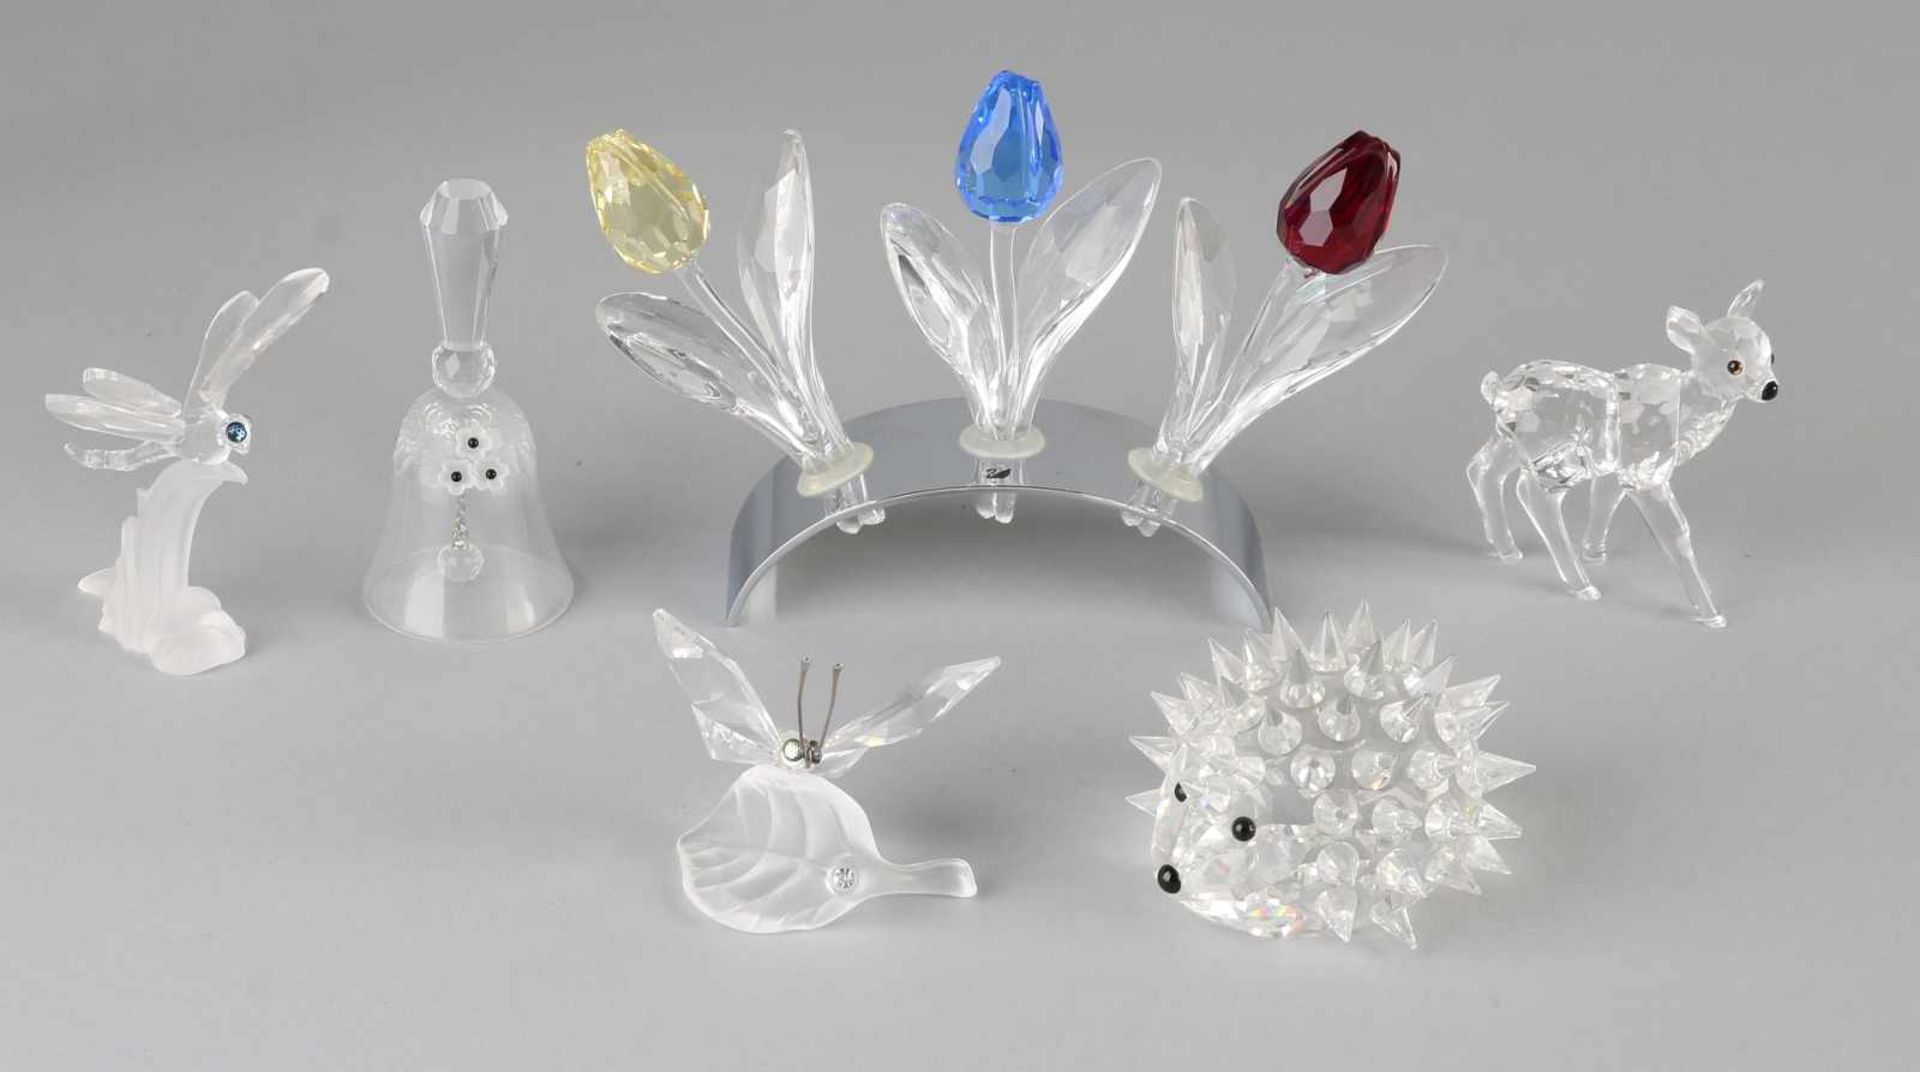 Lot diverse Swarovski in good condition and in original boxes including: butterfly on leaf (192